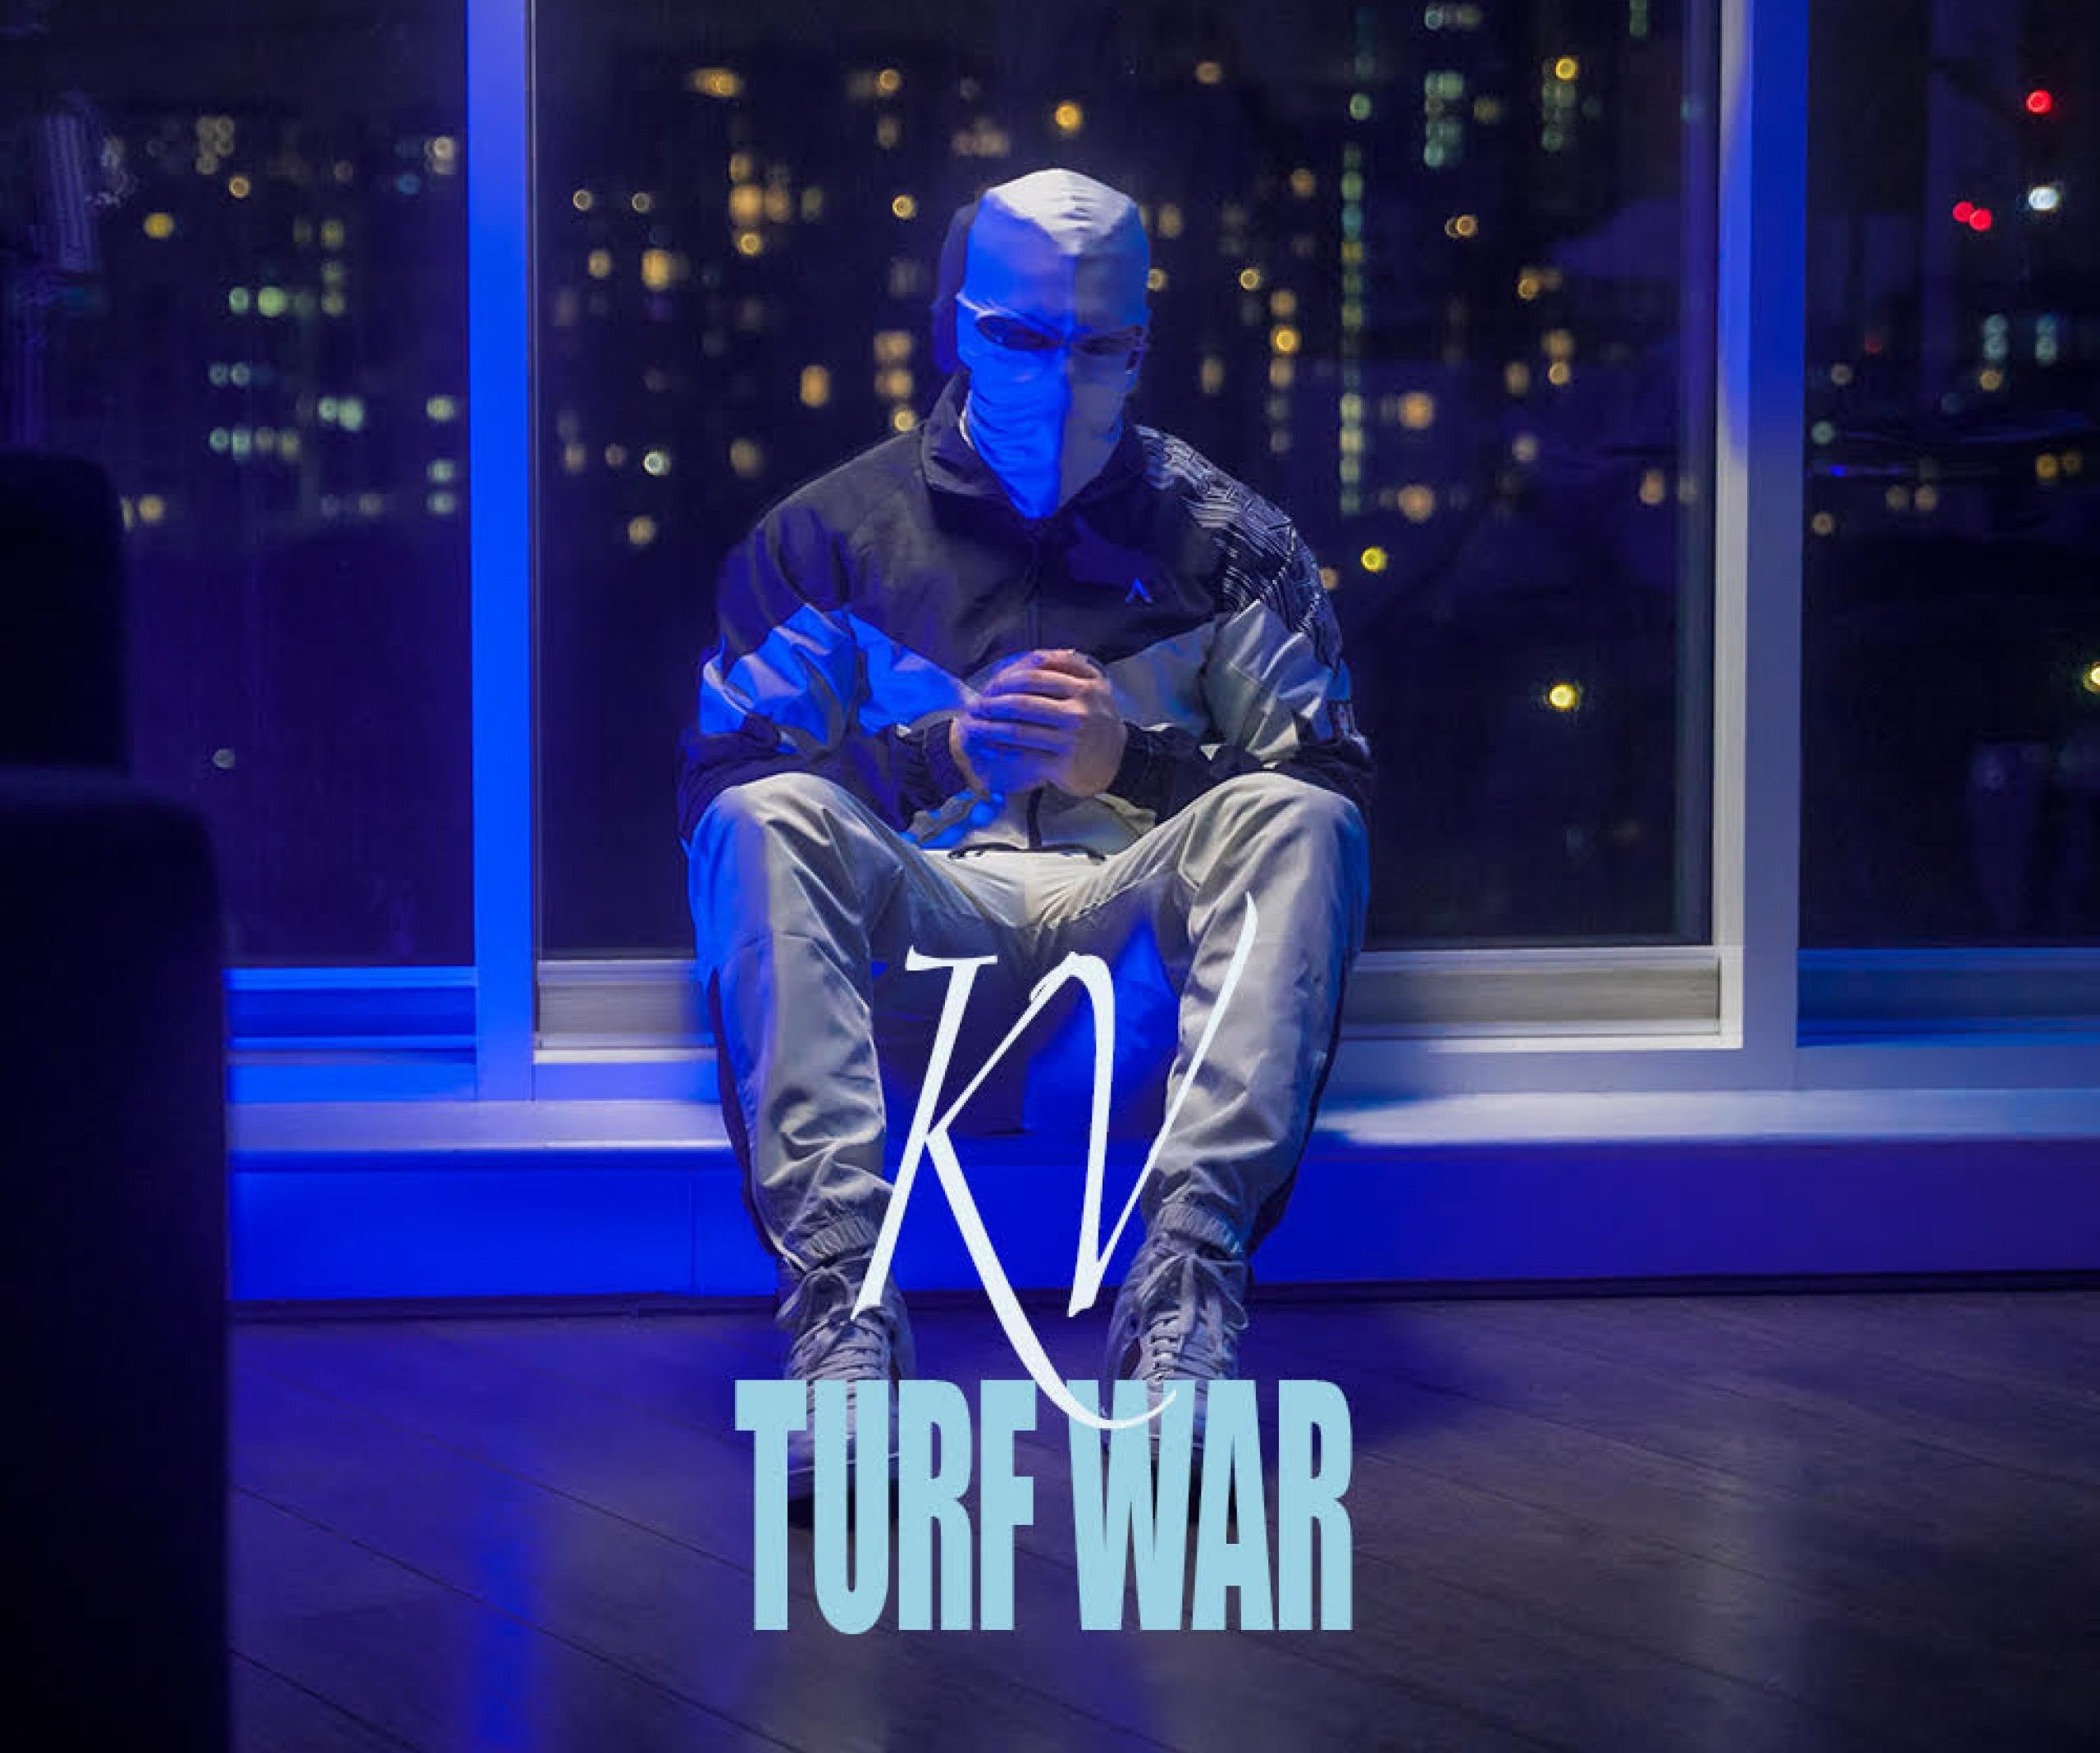 Kvlypto fuses melodic trap and drill in new single ‘Turf War’